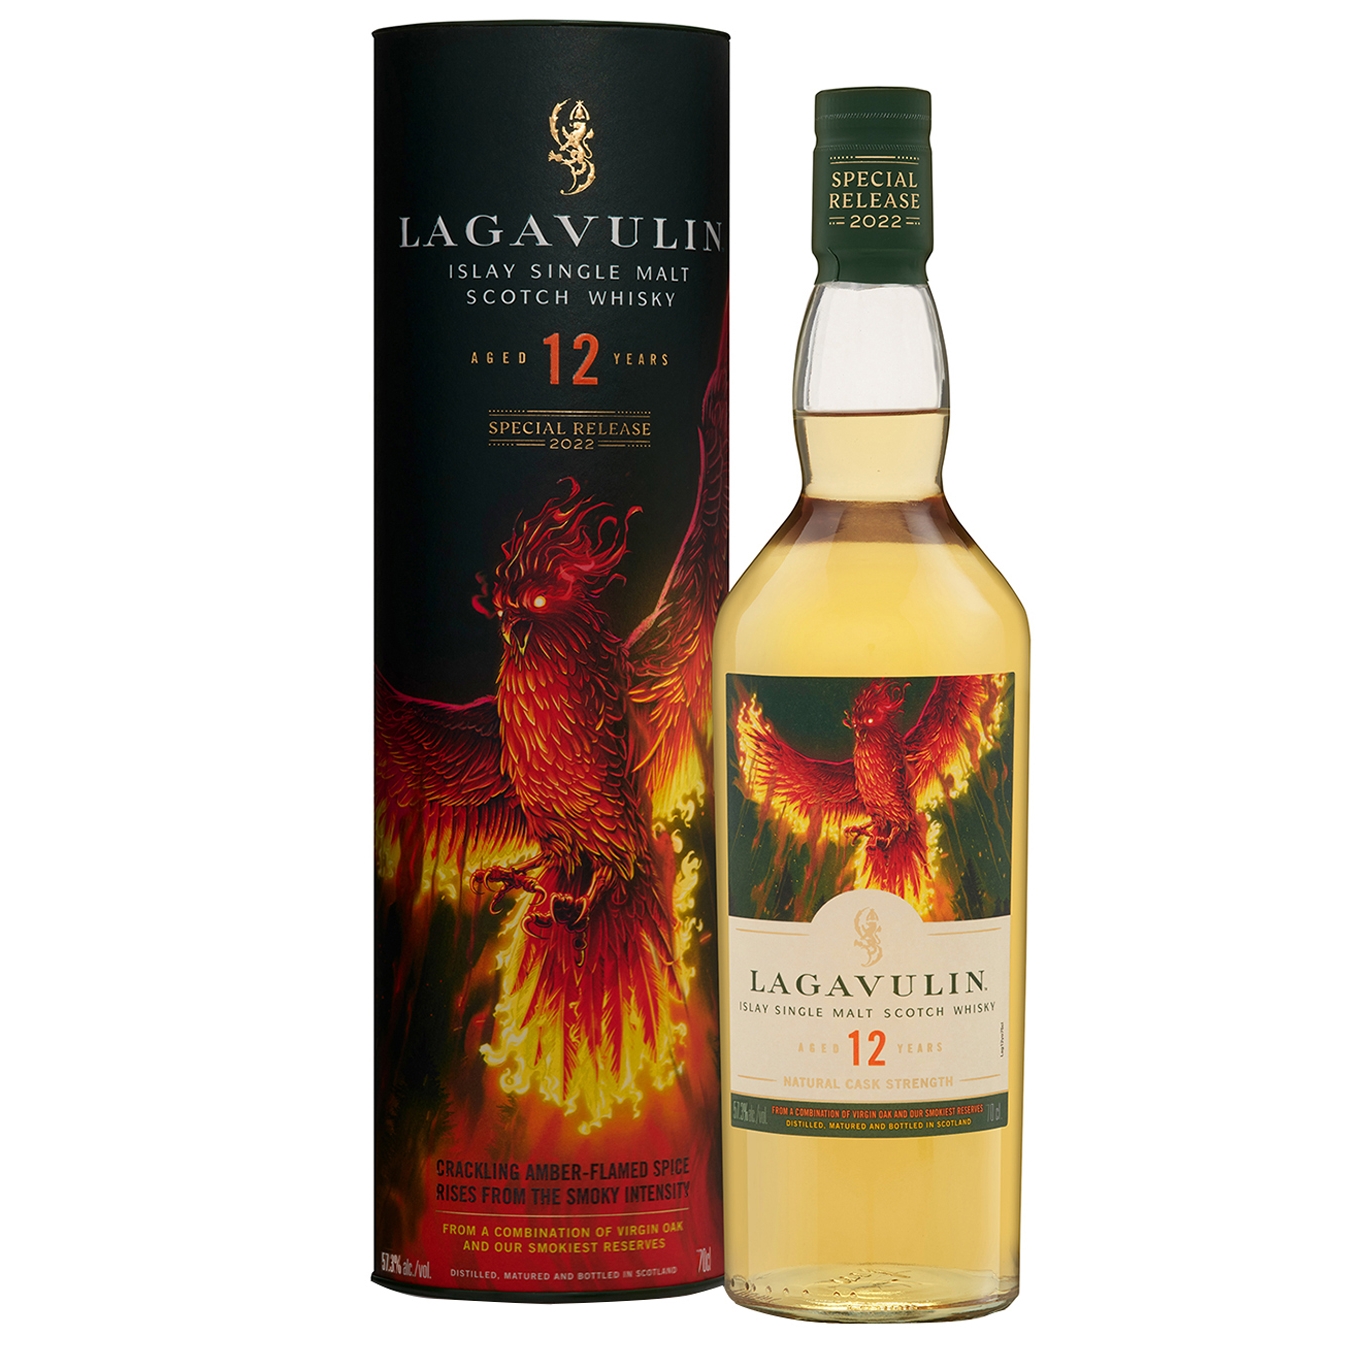 Lagavulin 12 Year Old Single Malt Scotch Whisky Special Release 2022